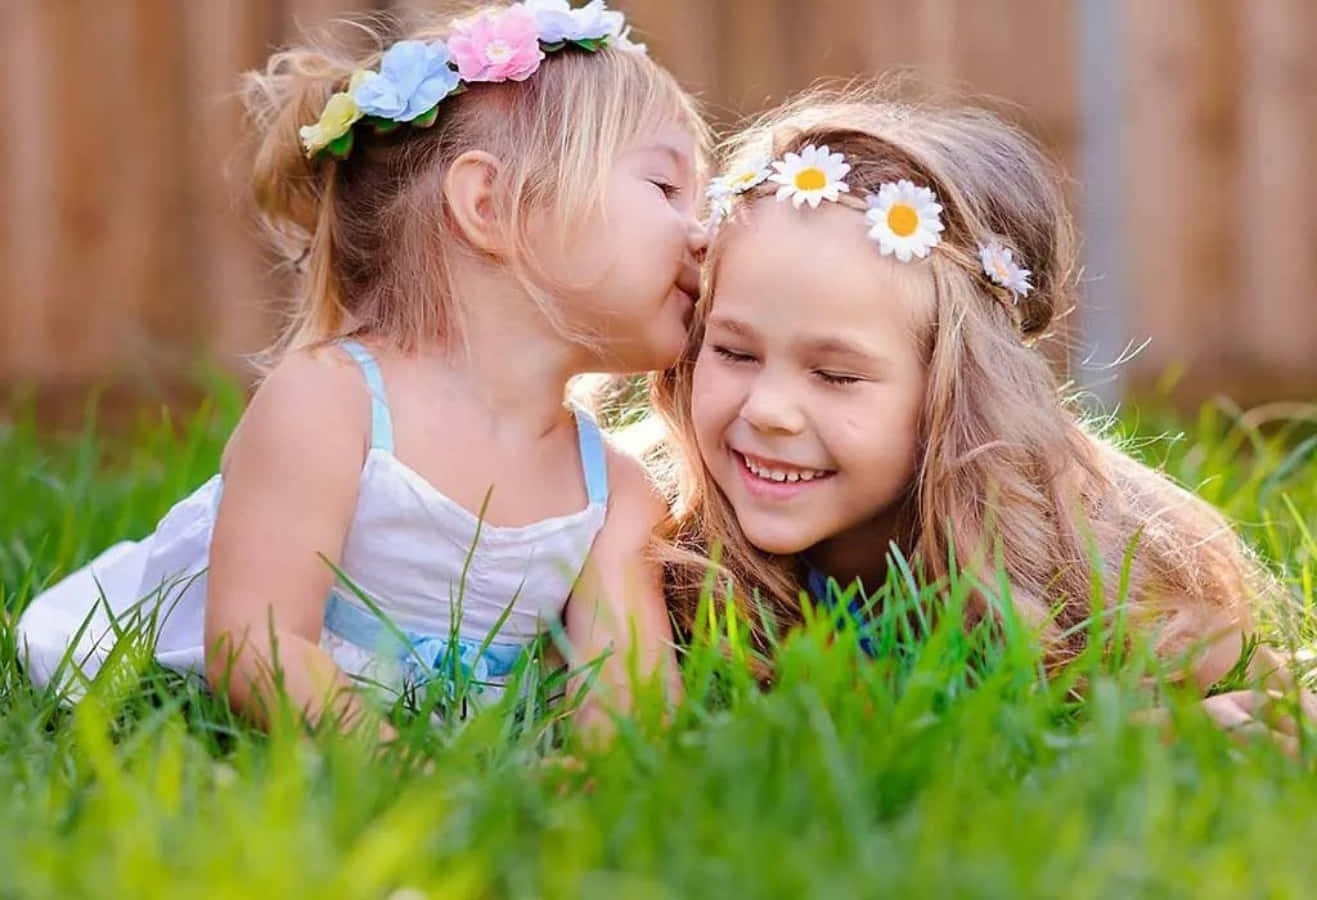 Two Little Girls Kissing In The Grass